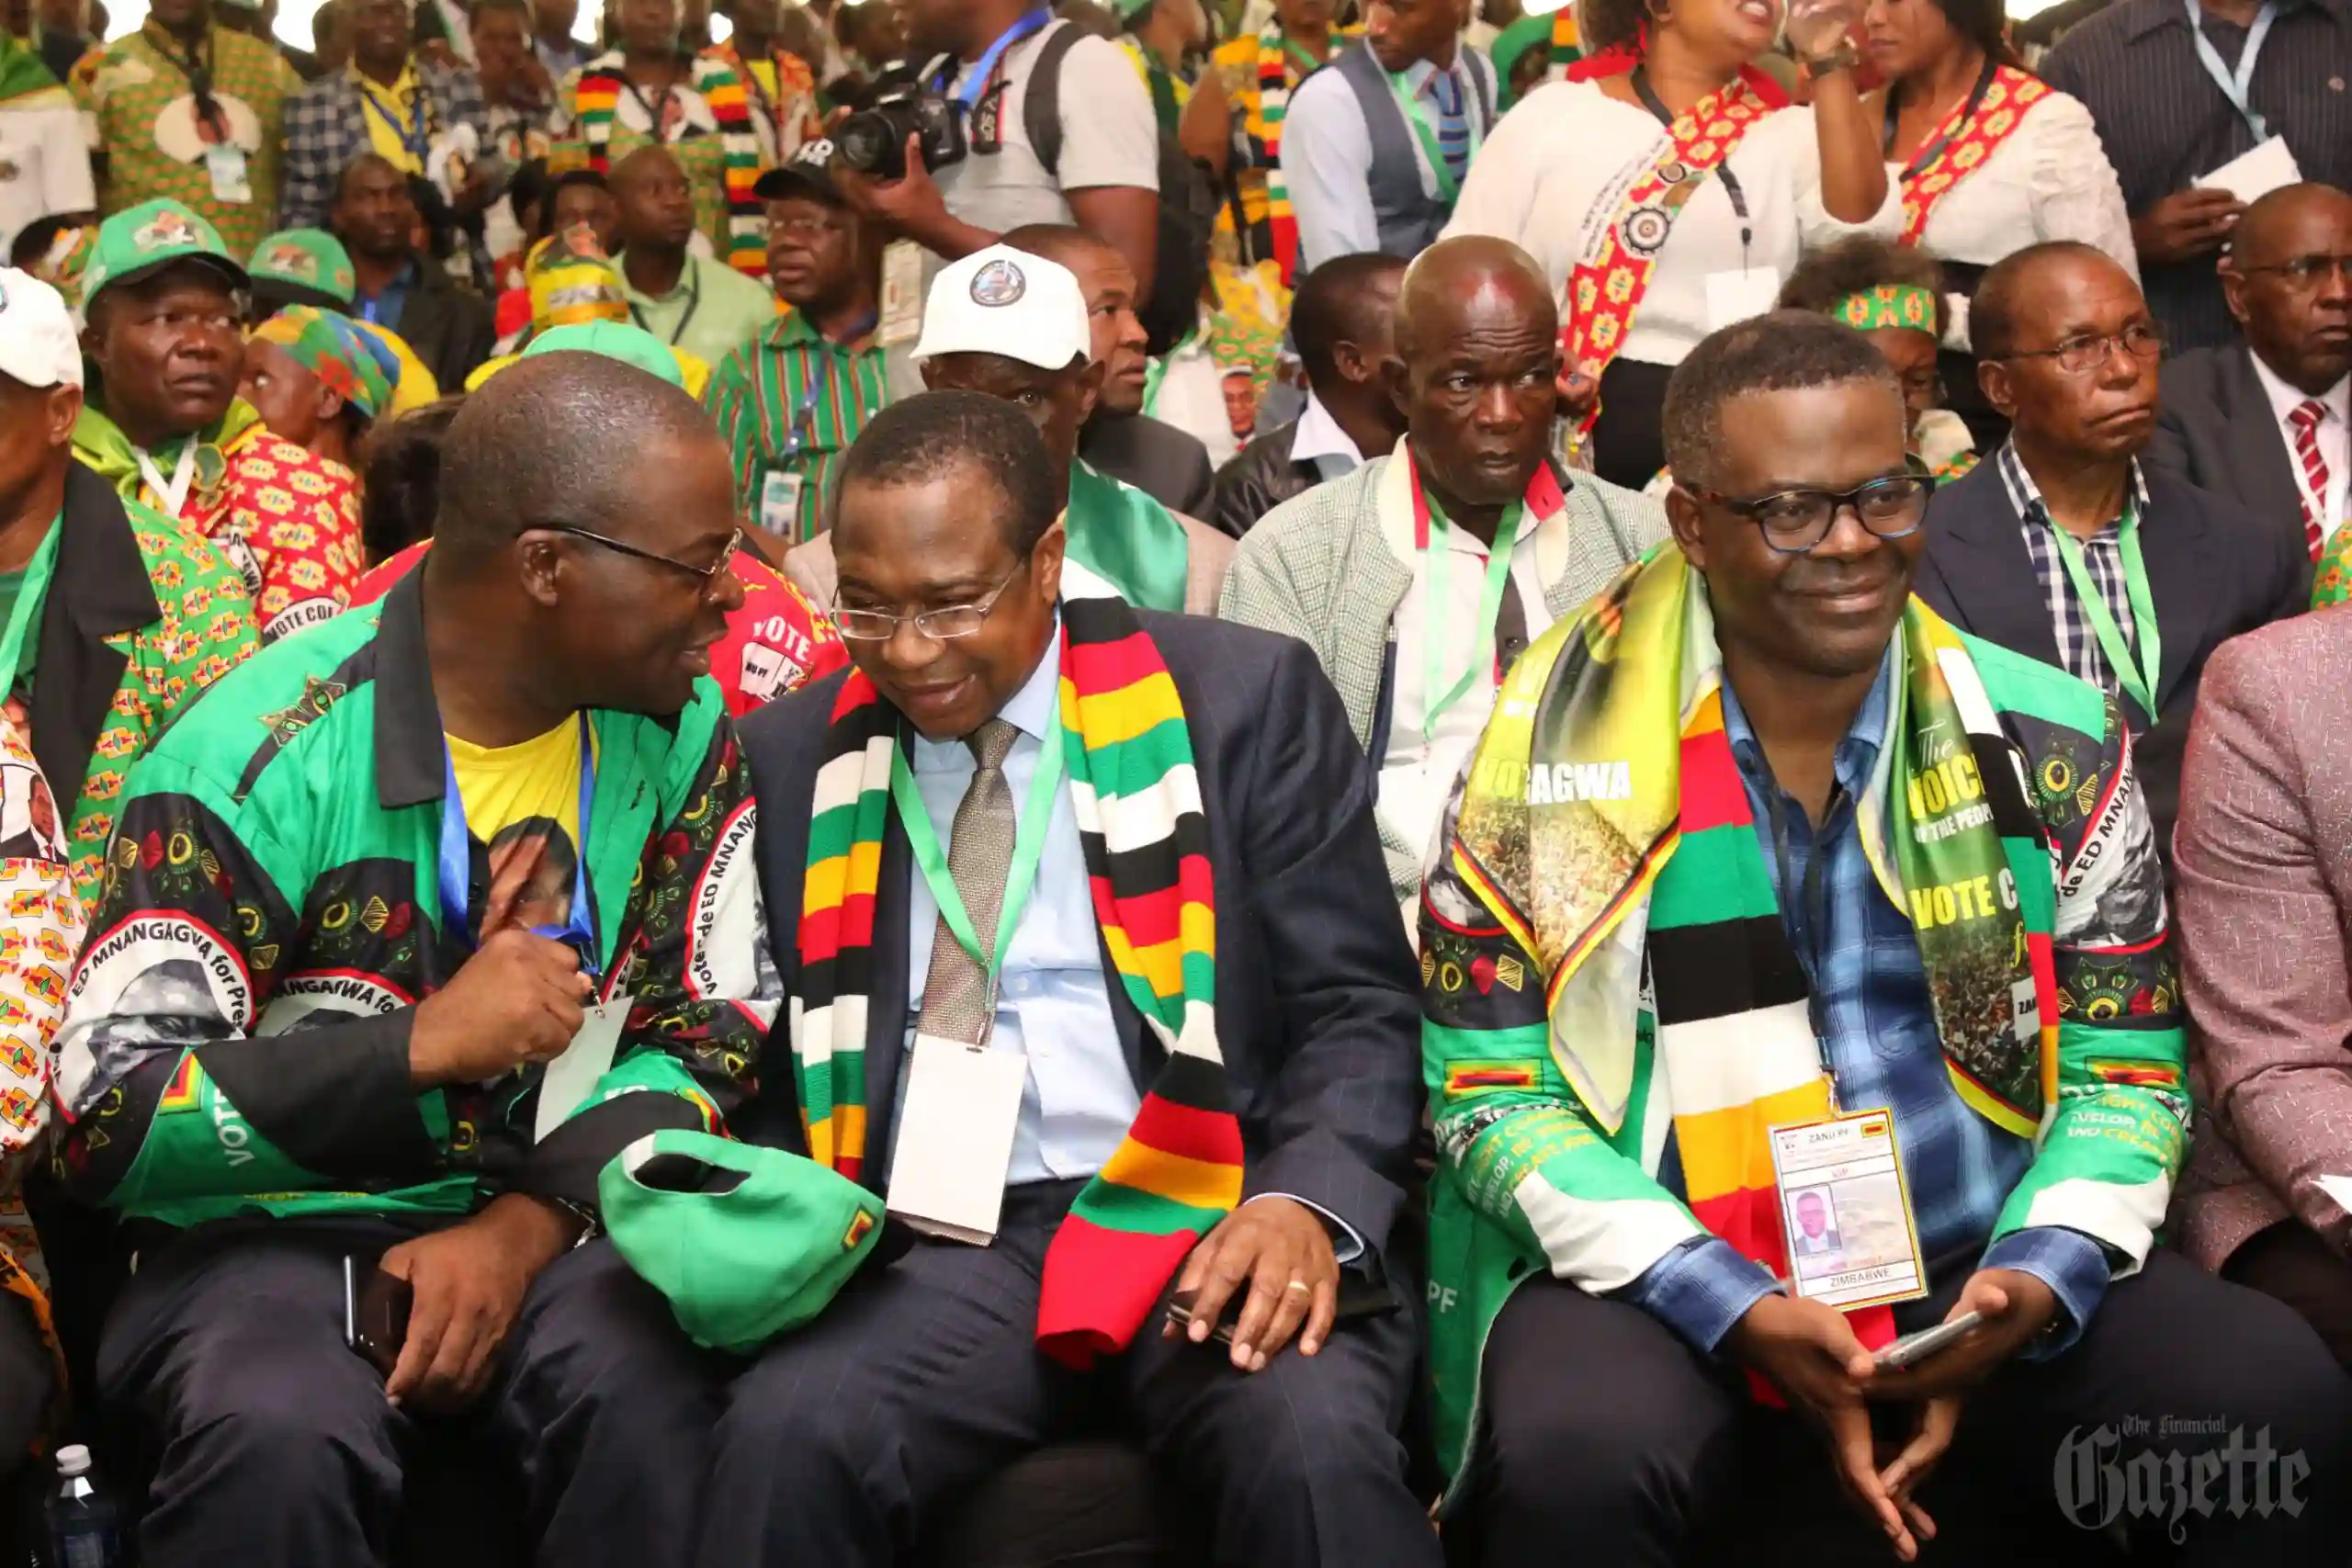 ZANU PF Sends High-Powered Delegation After Police Drove "Its Illegal Miners" Out Of Gold-rich Area